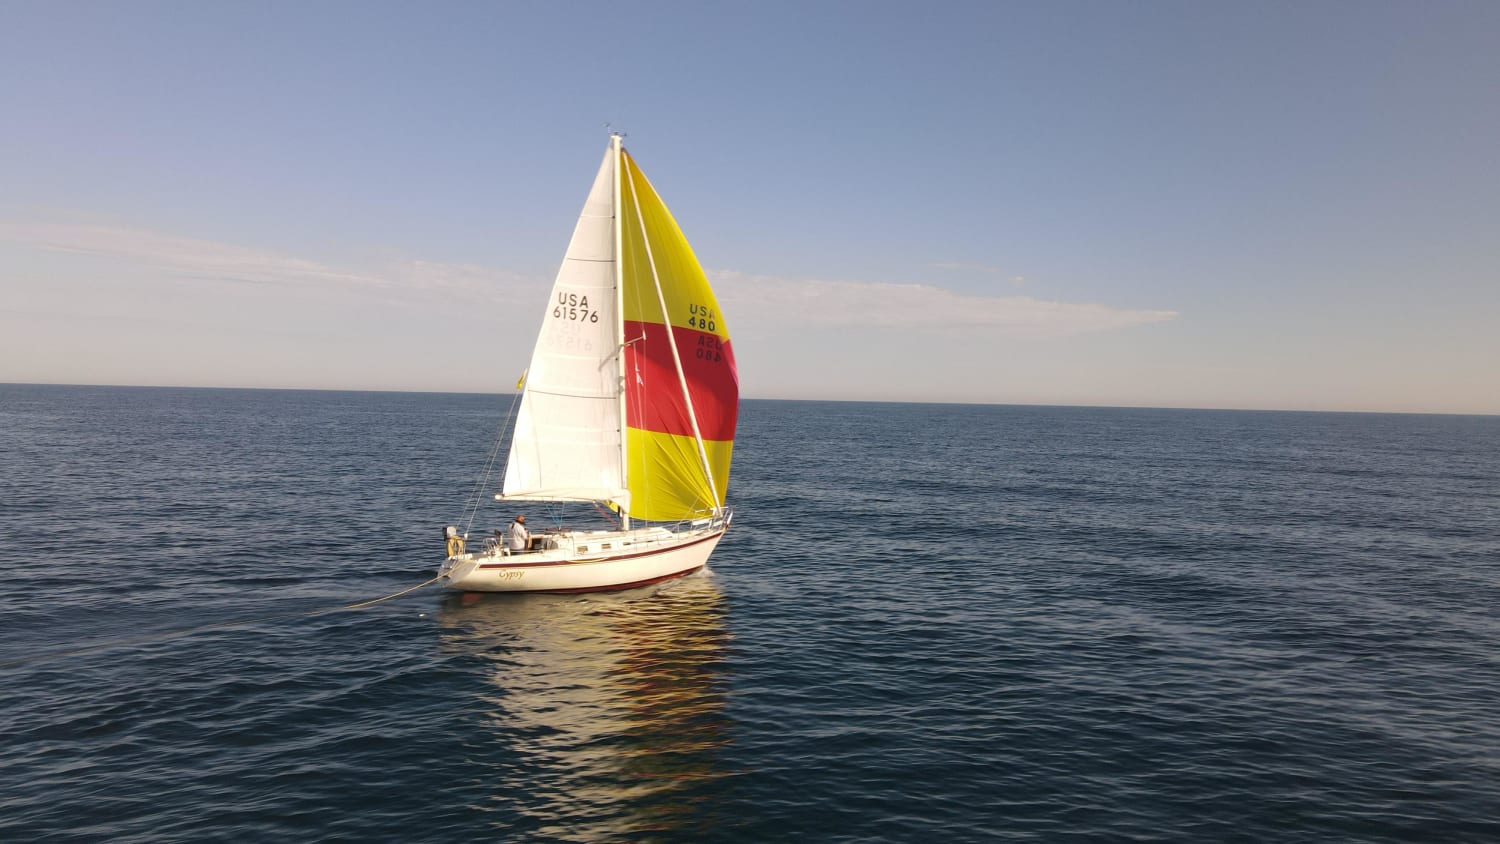 Are we still doing hobbies? Mine is solo distance sailboat racing. Any other sailors here?